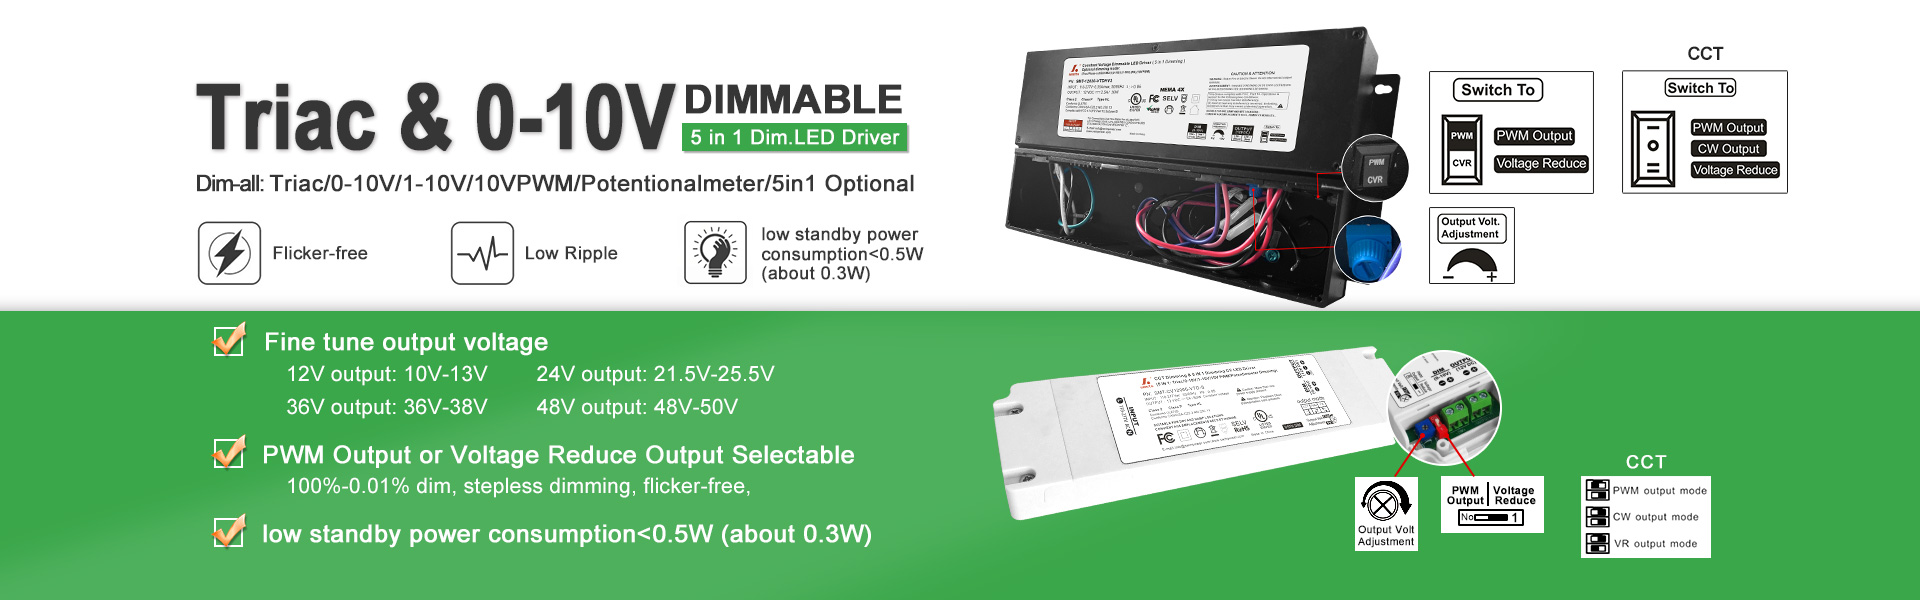 Triac & 0-10V dimmable LED driver